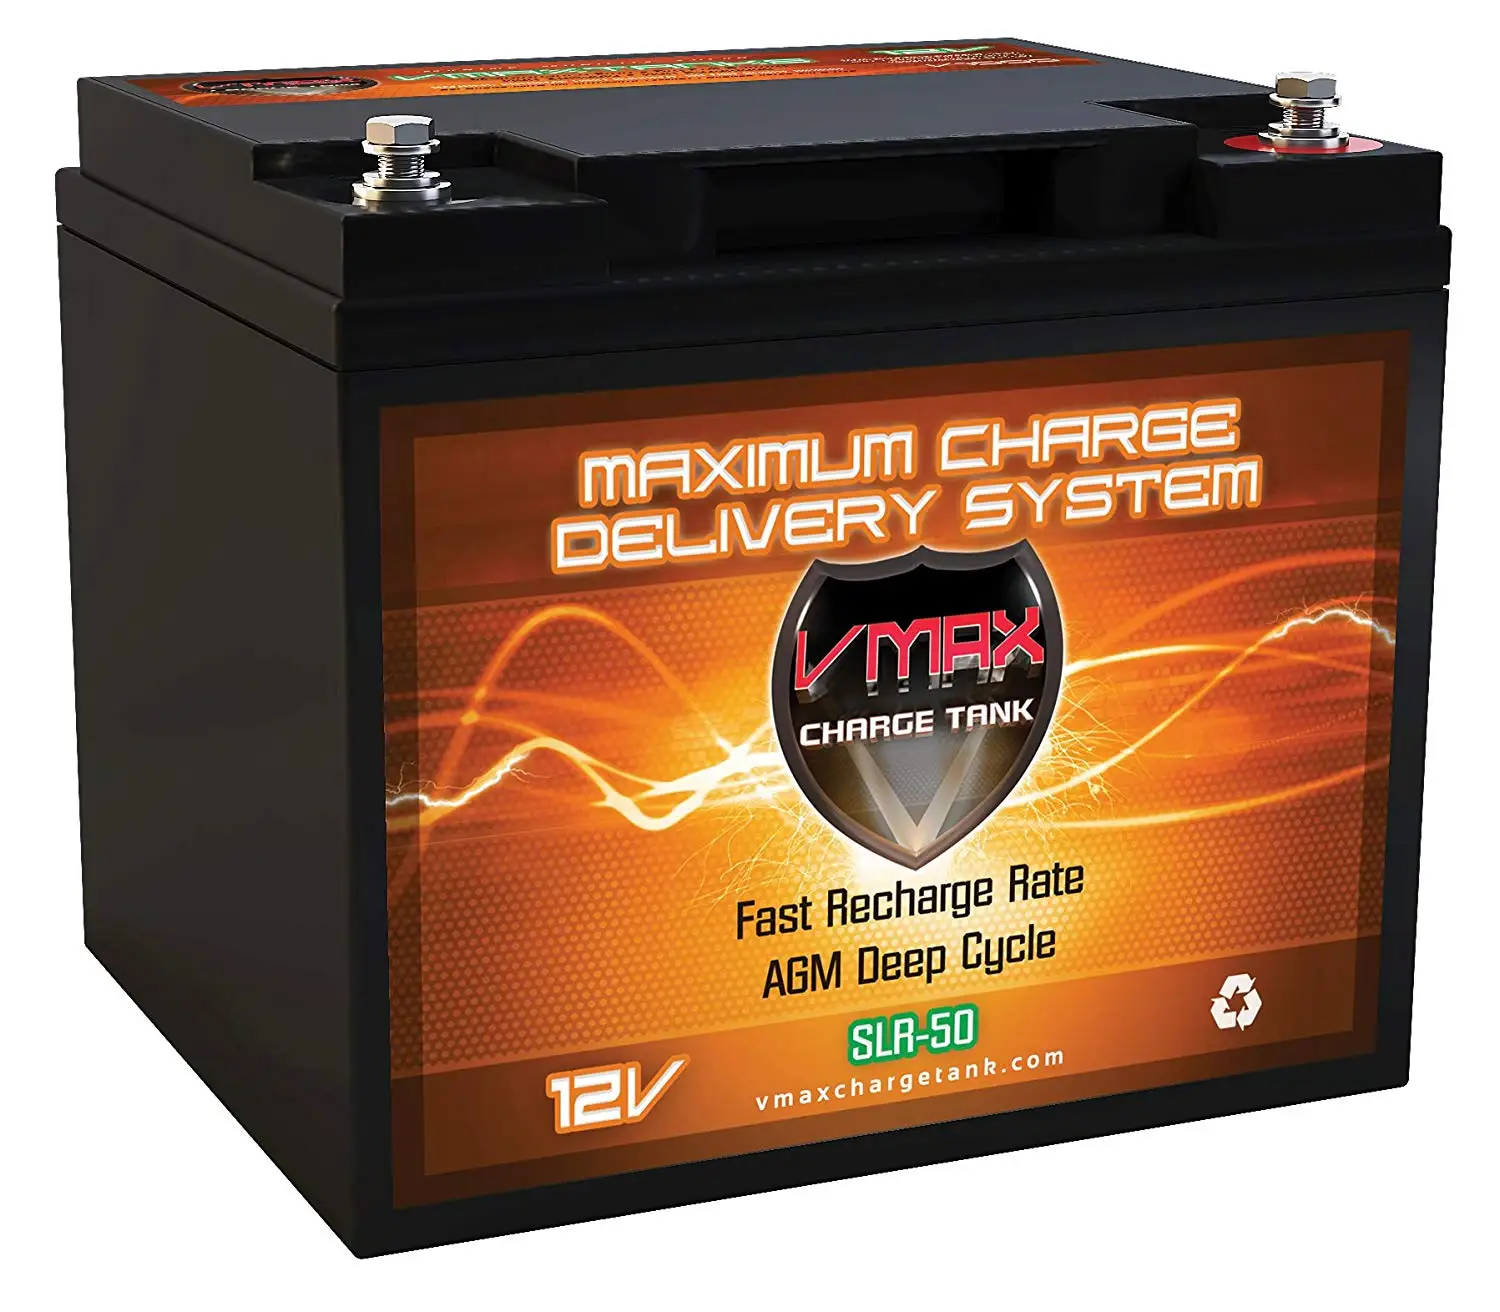 mahindra tractor batteries 12v 50ah replacement cost